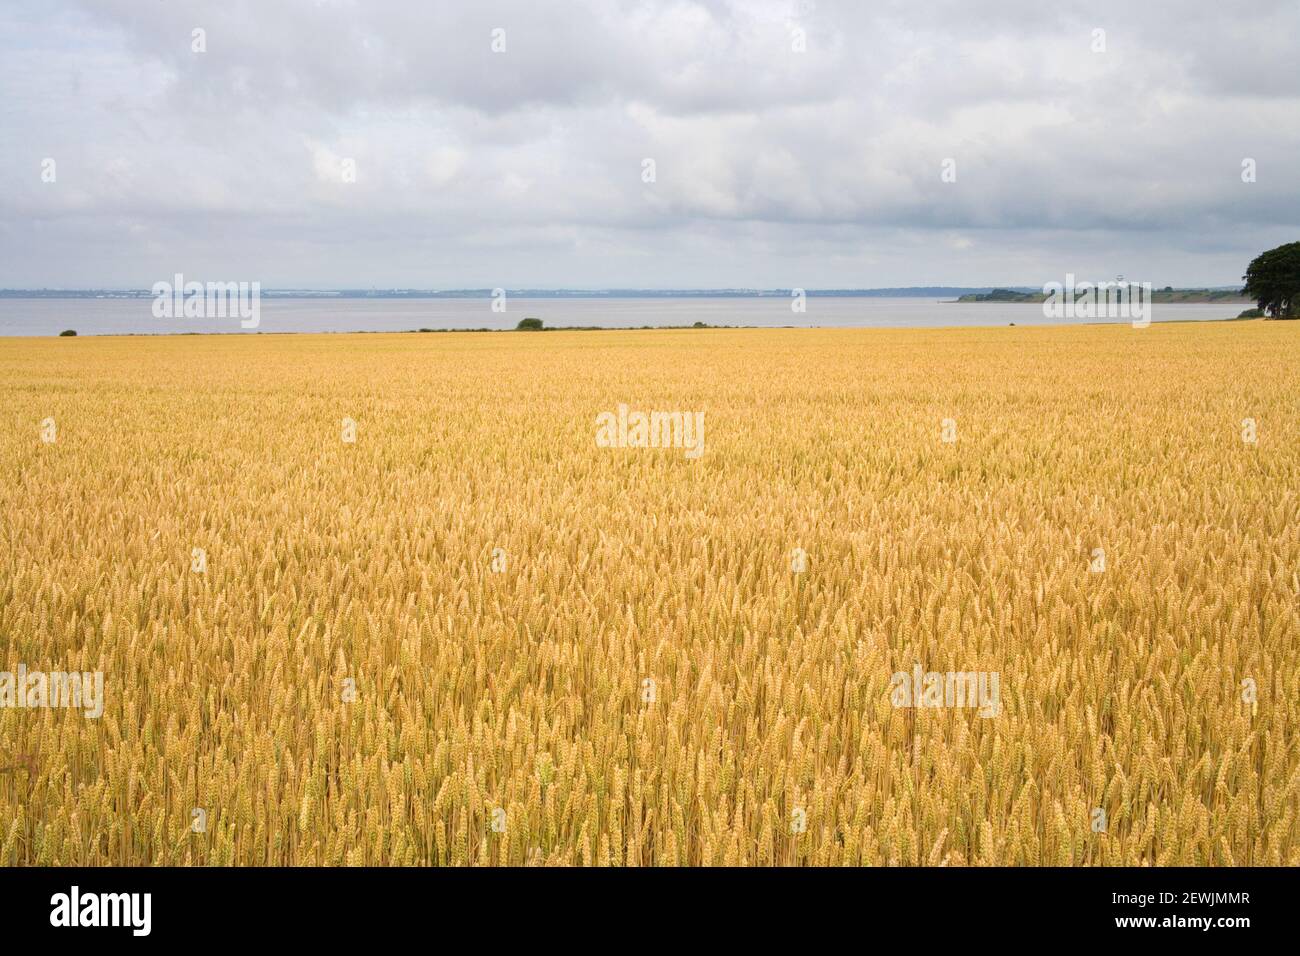 crops growing at hale head on the banks of the mersey river Stock Photo